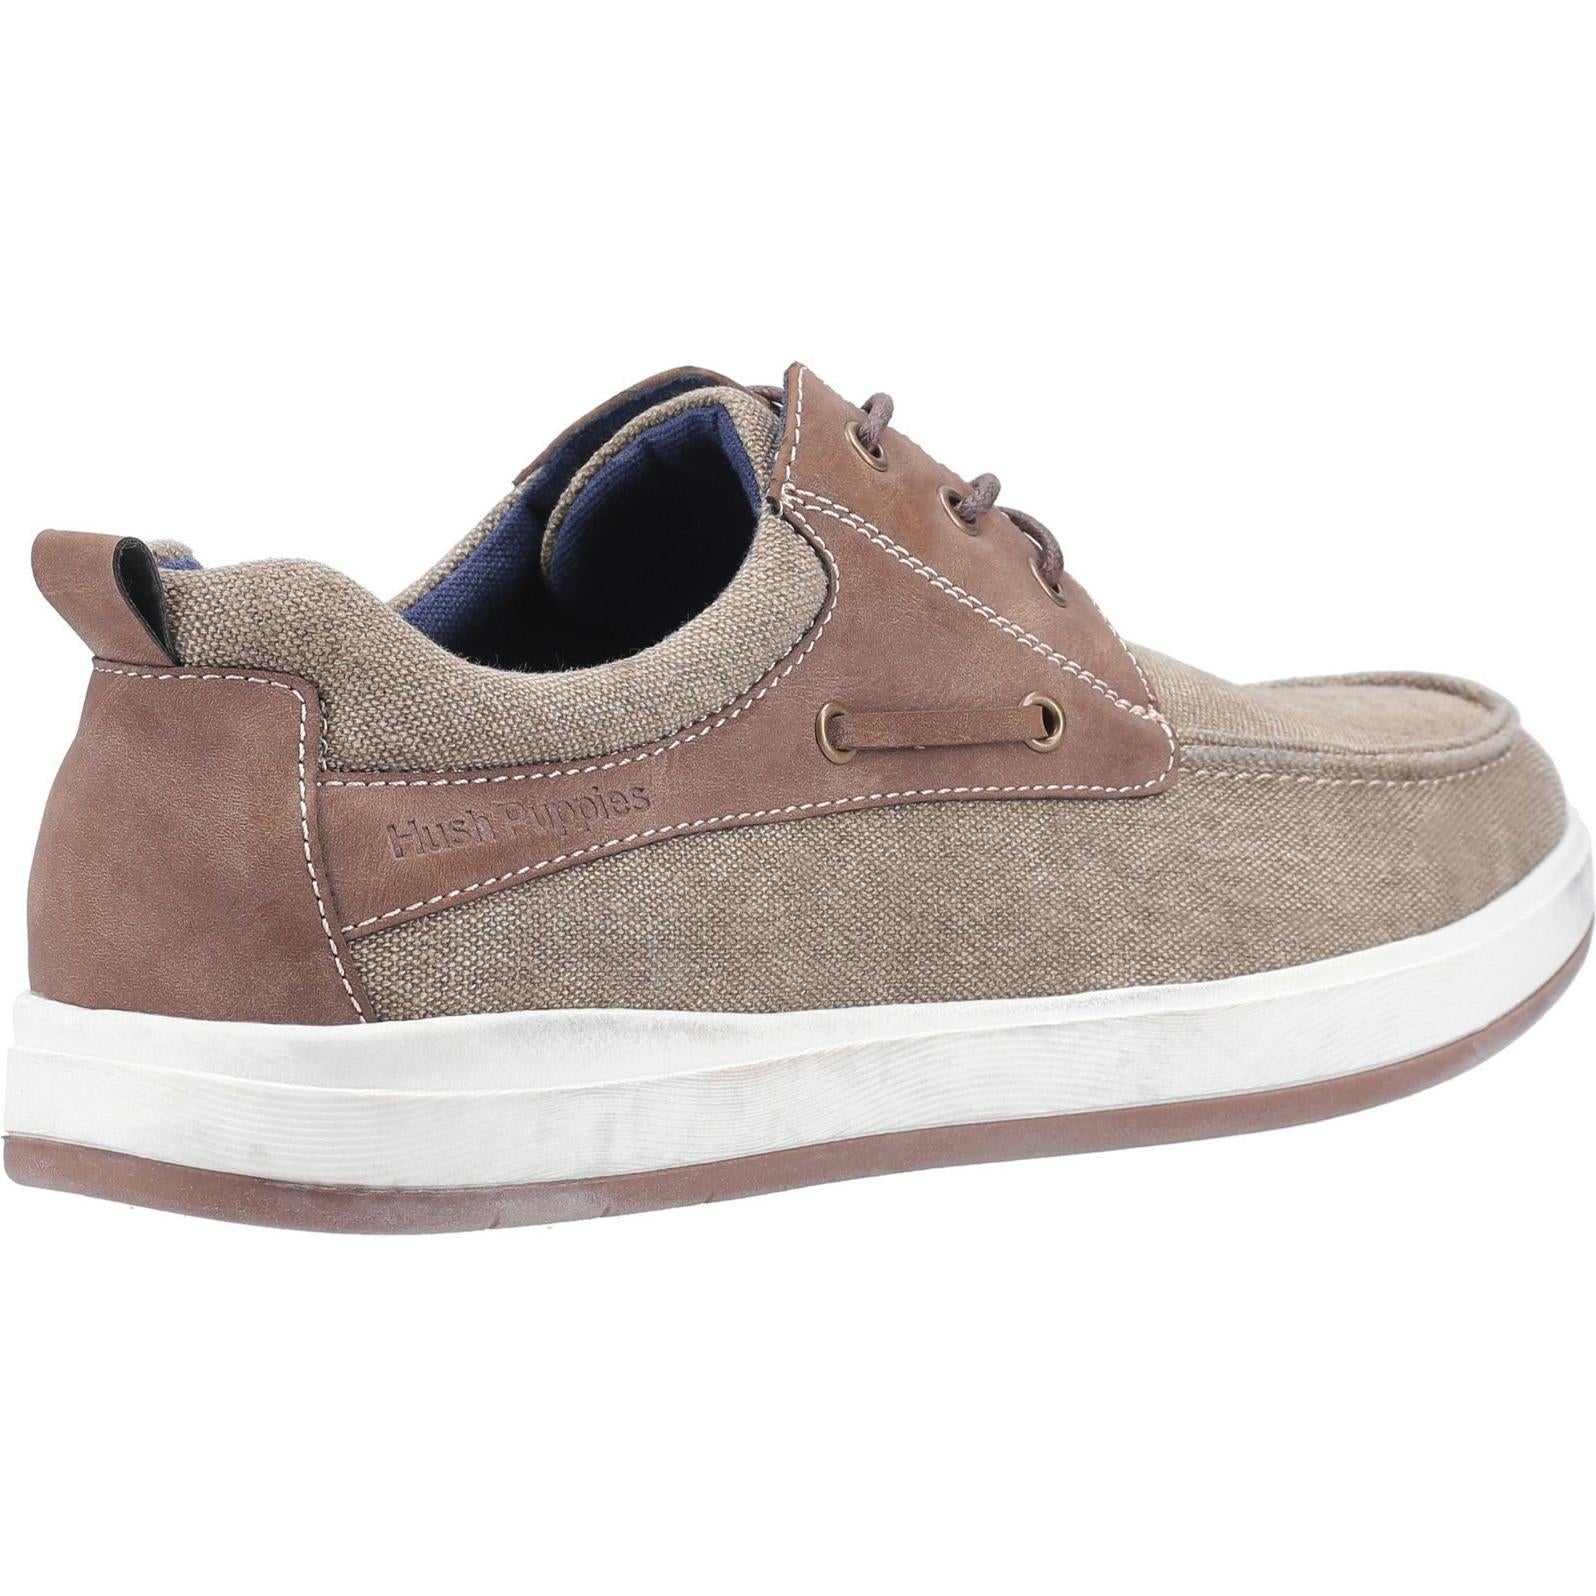 Hush Puppies Aiden Lace Up Boat Shoe